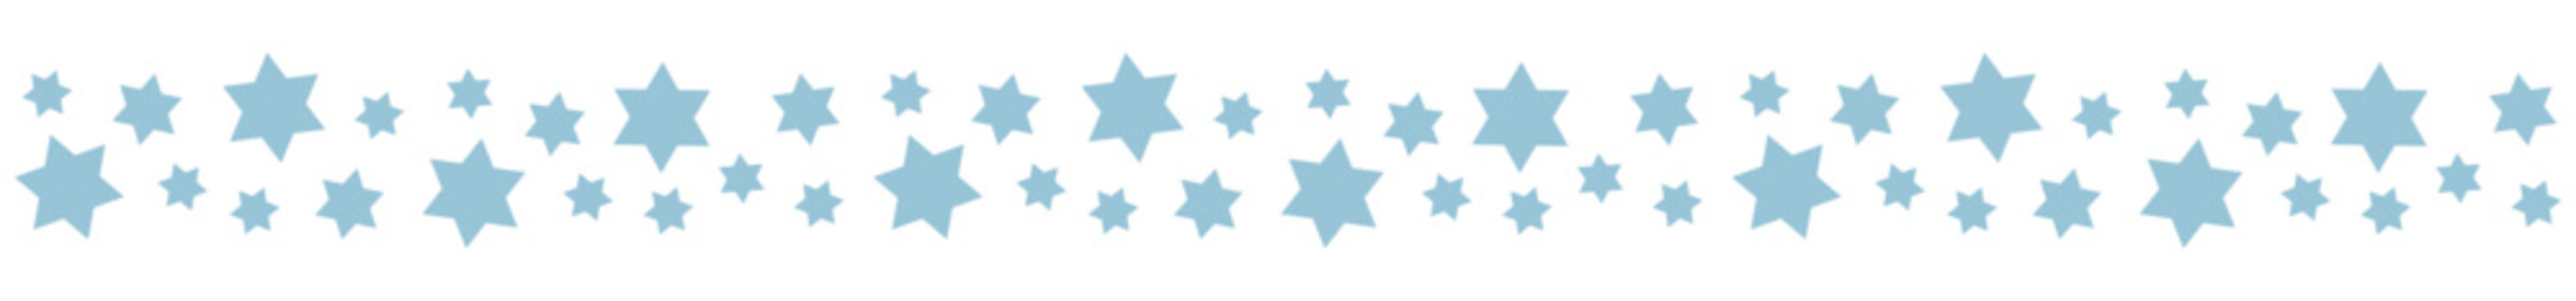 Seamless border garland with blue stars of David for Passover, Pesach, Hanukkah and other Jewish holidays Isolated vector and PNG illustration on transparent background.